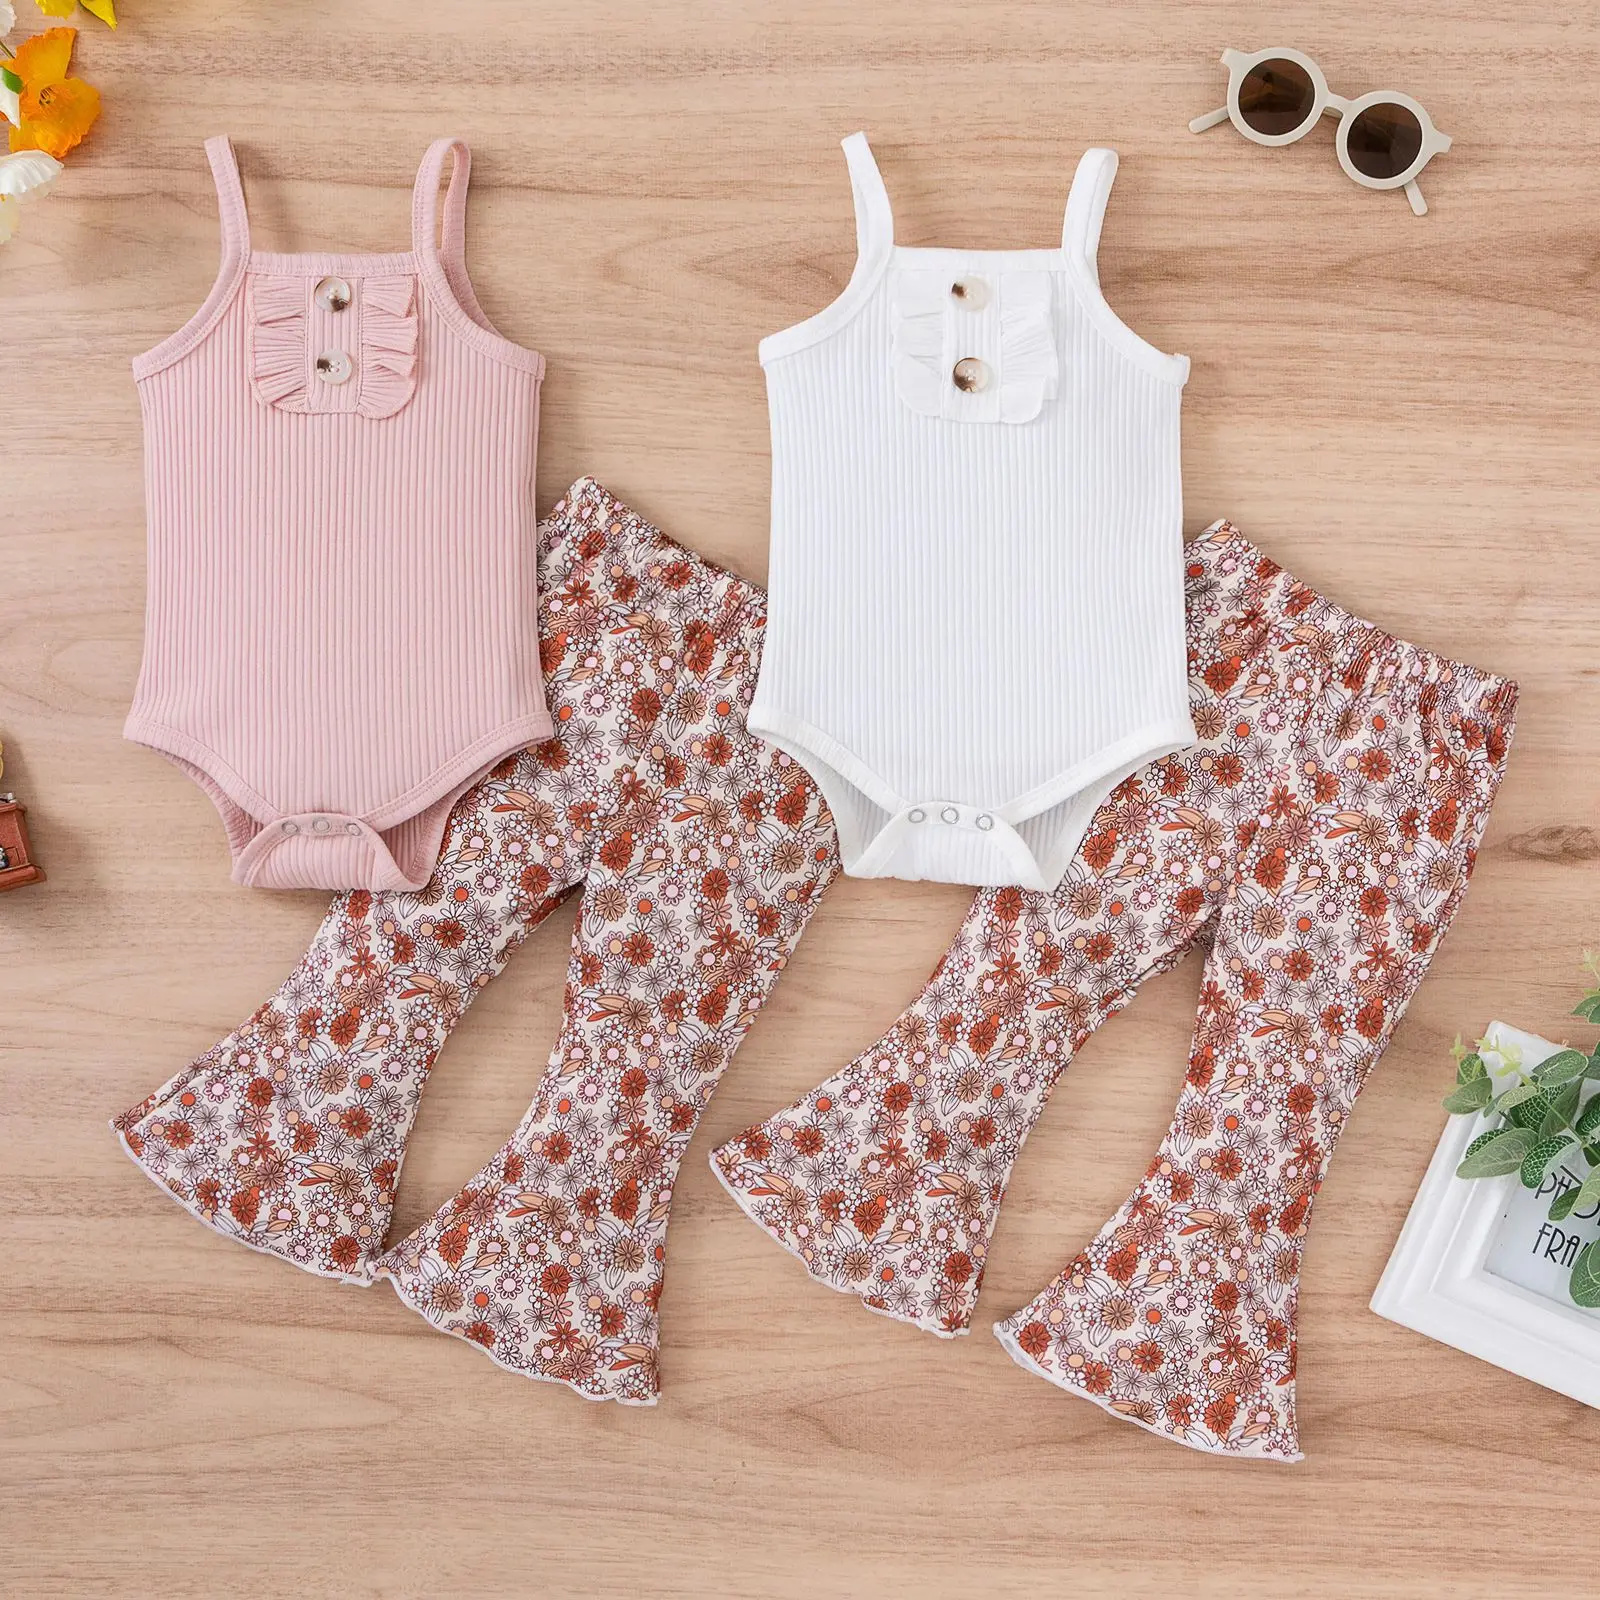 Newborn Baby Girl Clothes Set Toddler Girls Outfit Cute Sling Pit Stripe Romper+Floral Flared Oants Infant Summer Clothing 0-24M